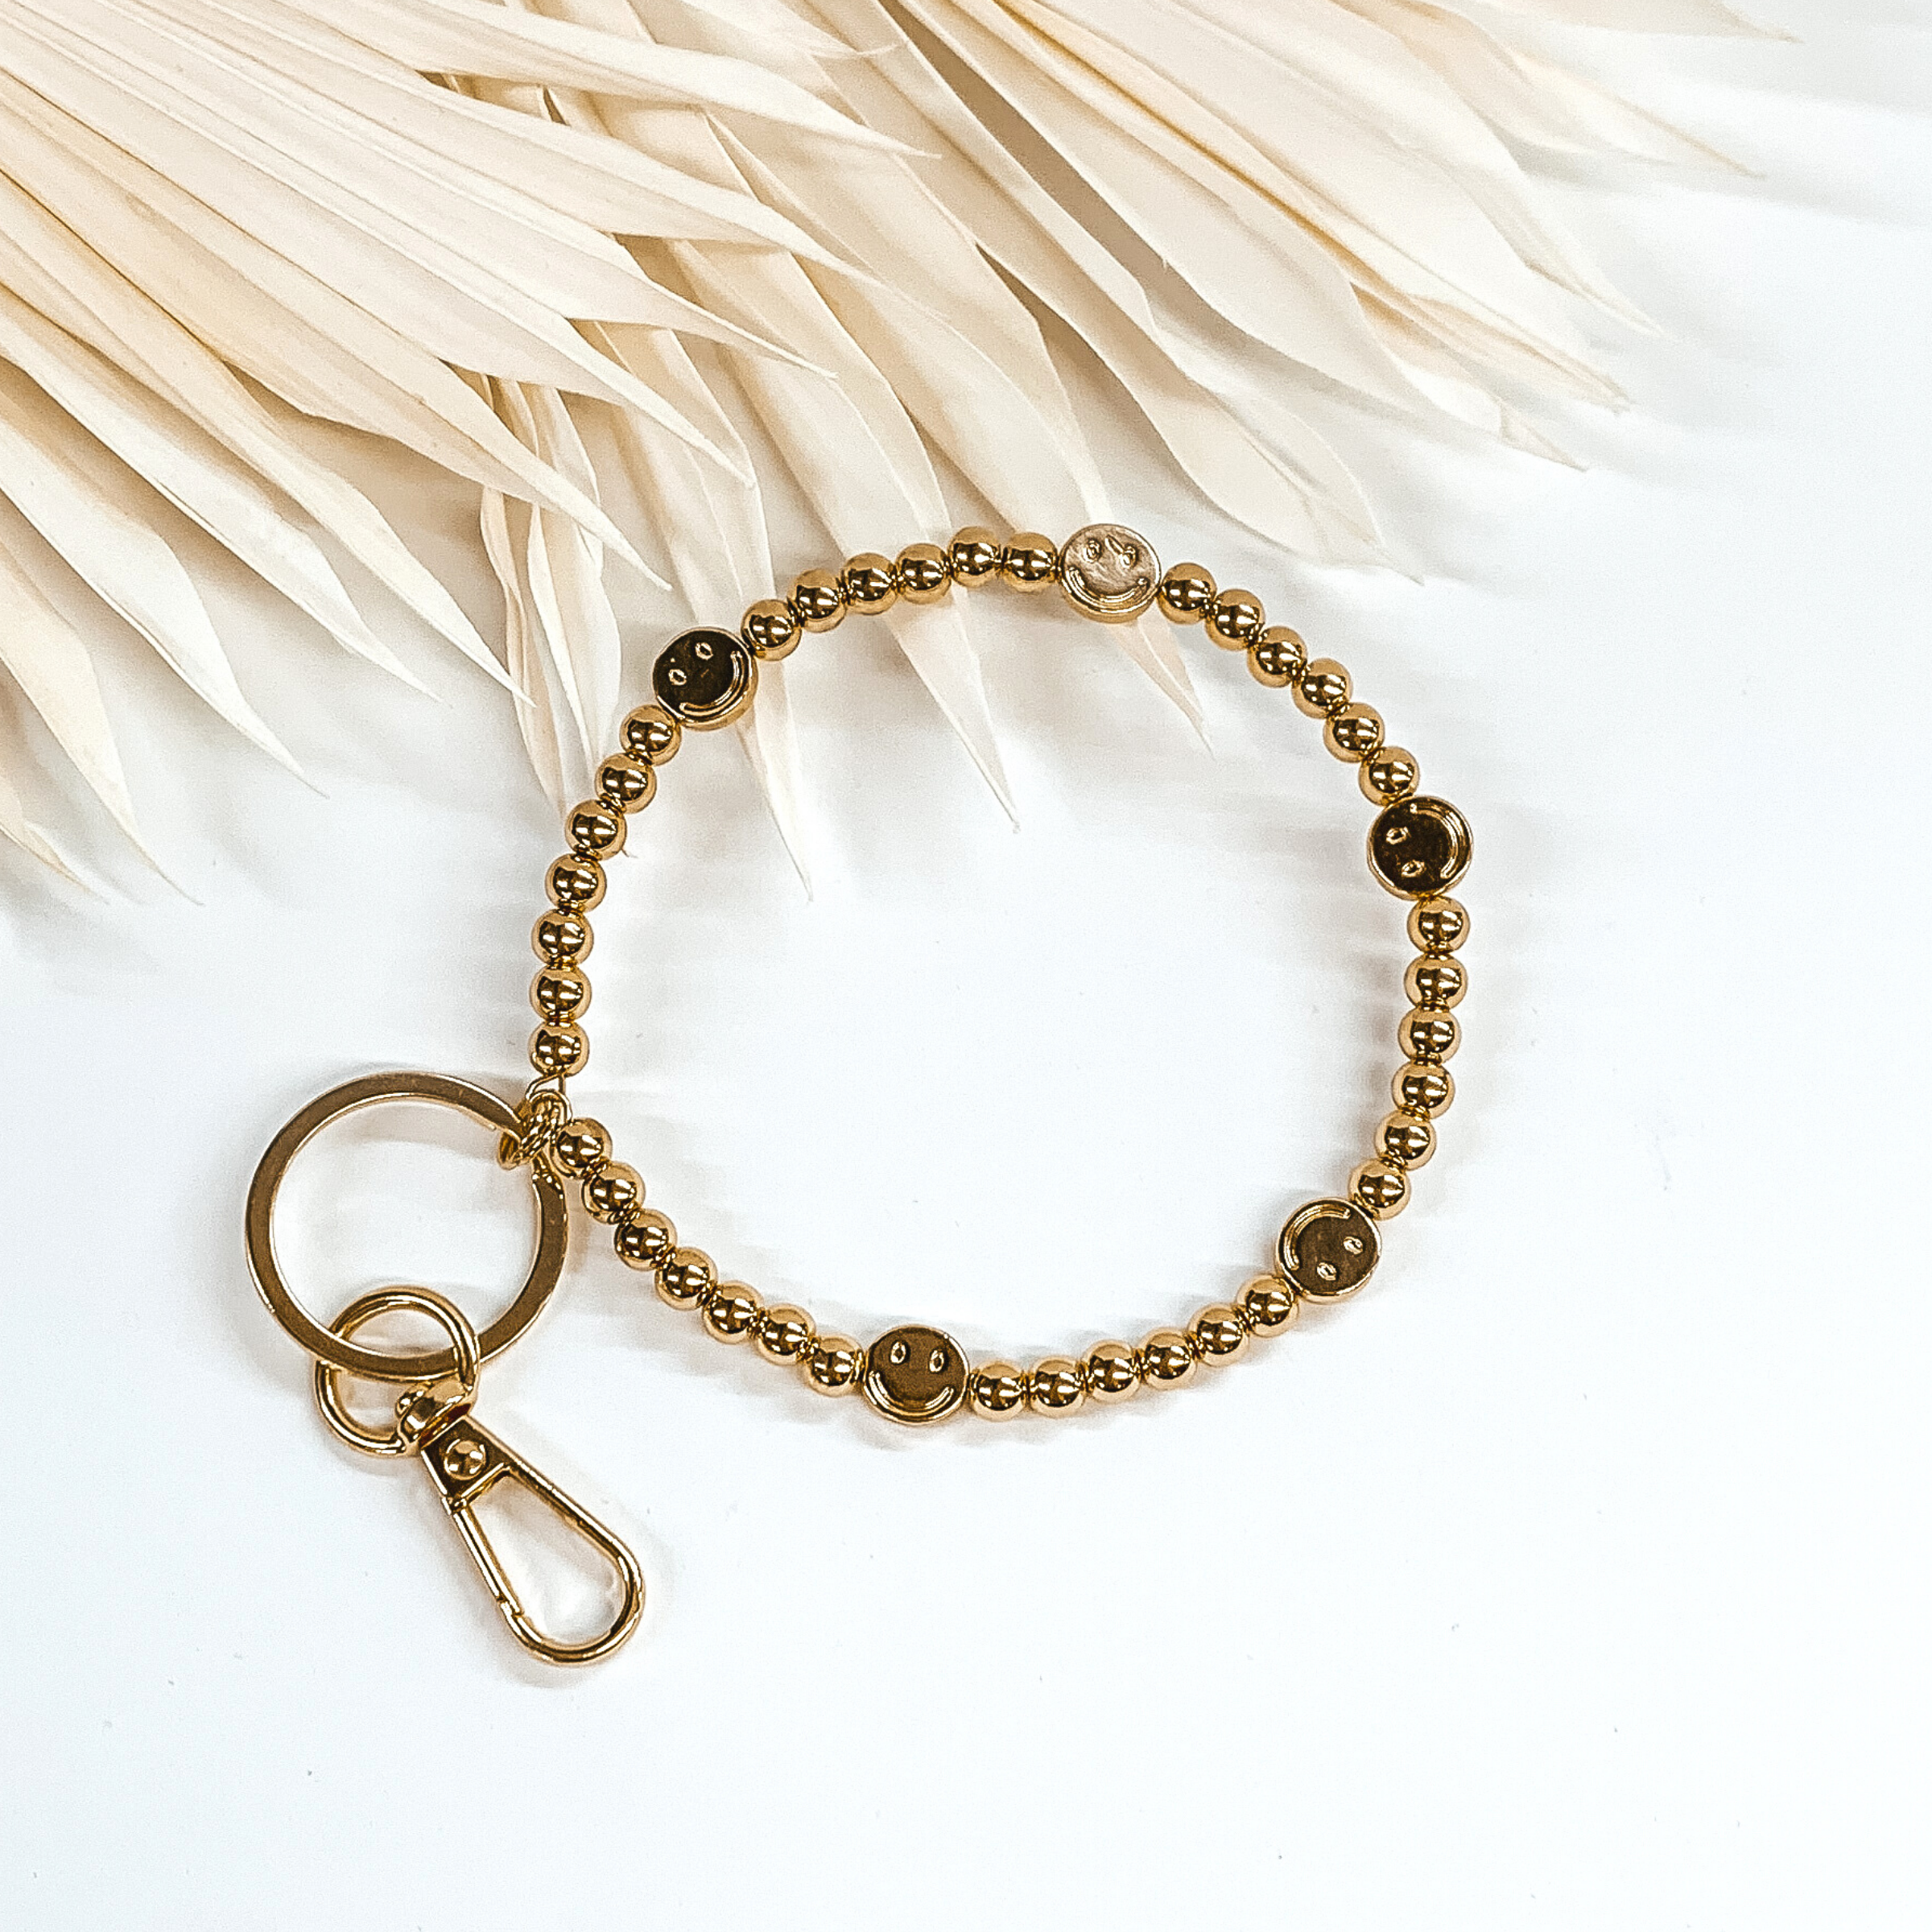 Gold beaded key ring with gold smiley face spacers. This key ring bracelet has a key ring and a clasp. This is pictured on a white background with white leaves at the top of the picture.